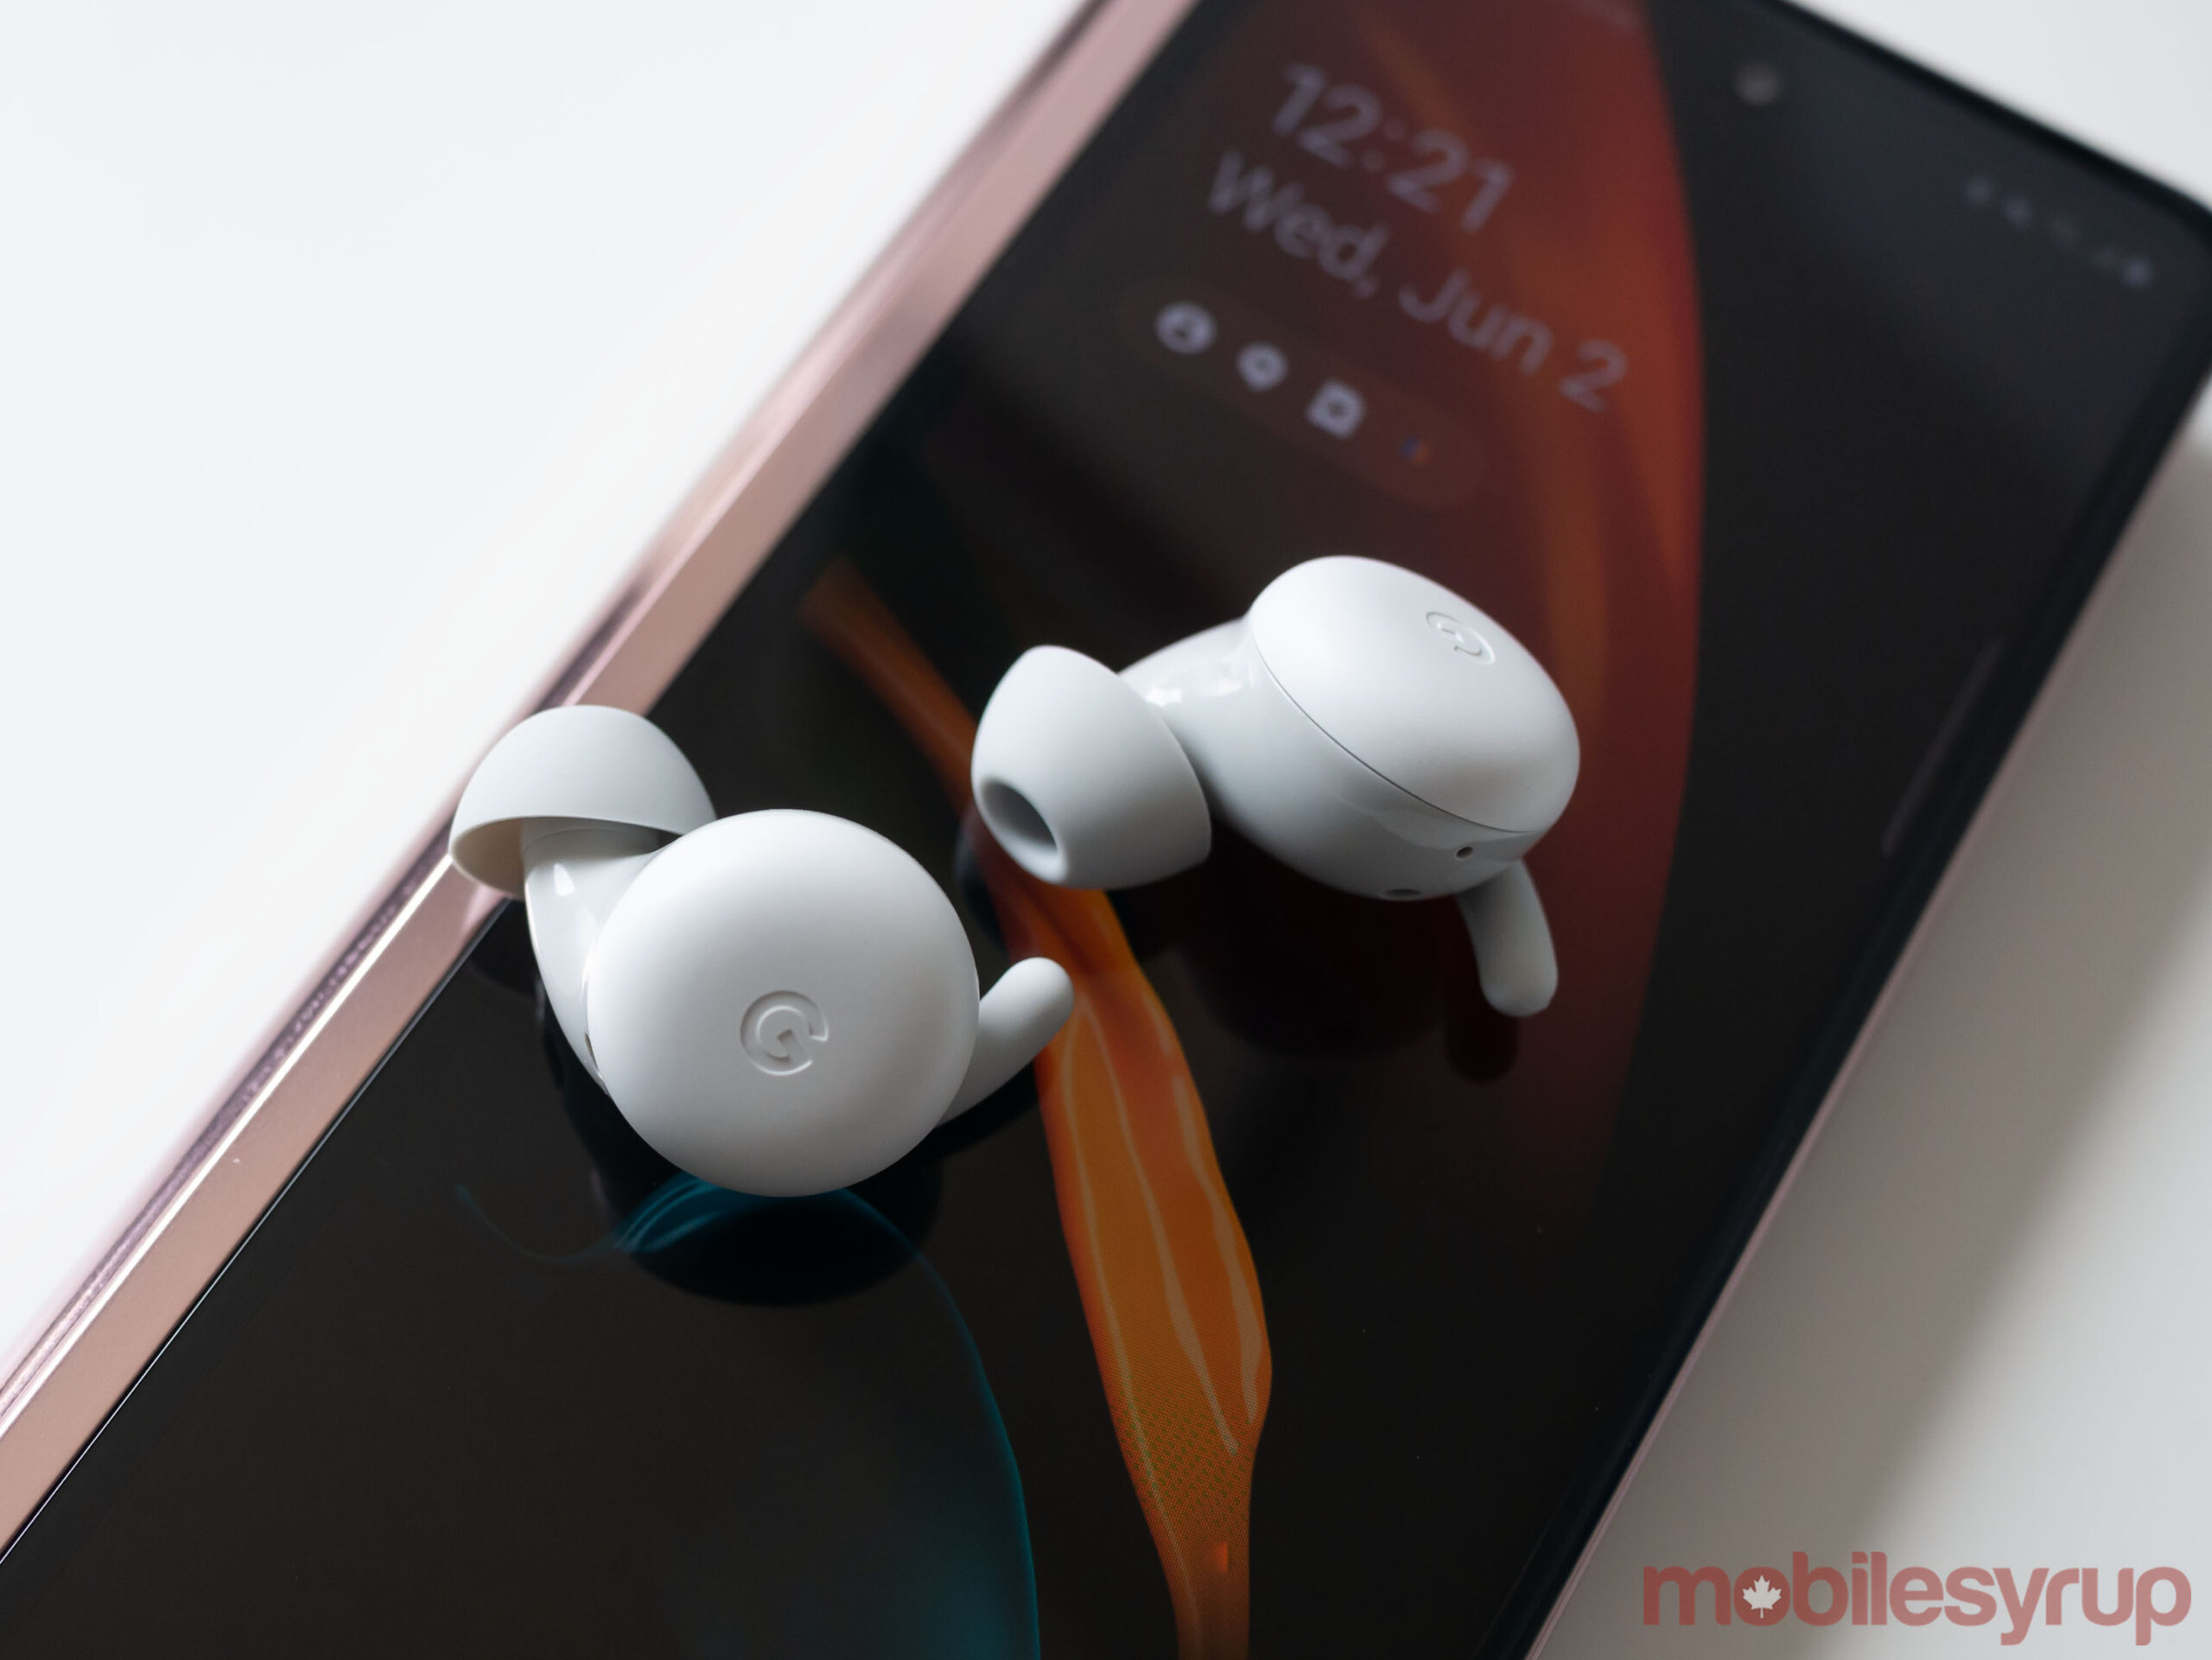 Pixel Buds A-Series on the Galaxy Z Fold 2 